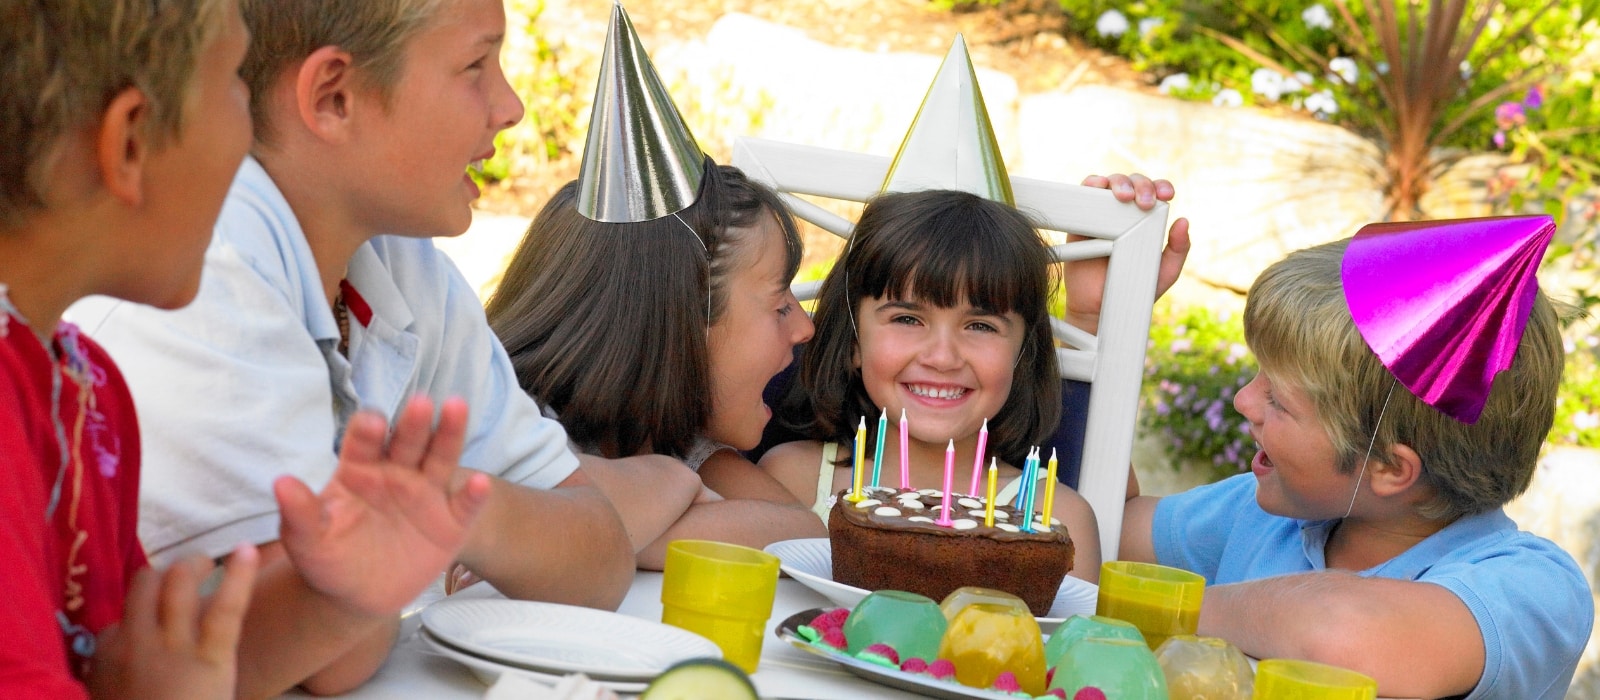 How to plan a surprise party